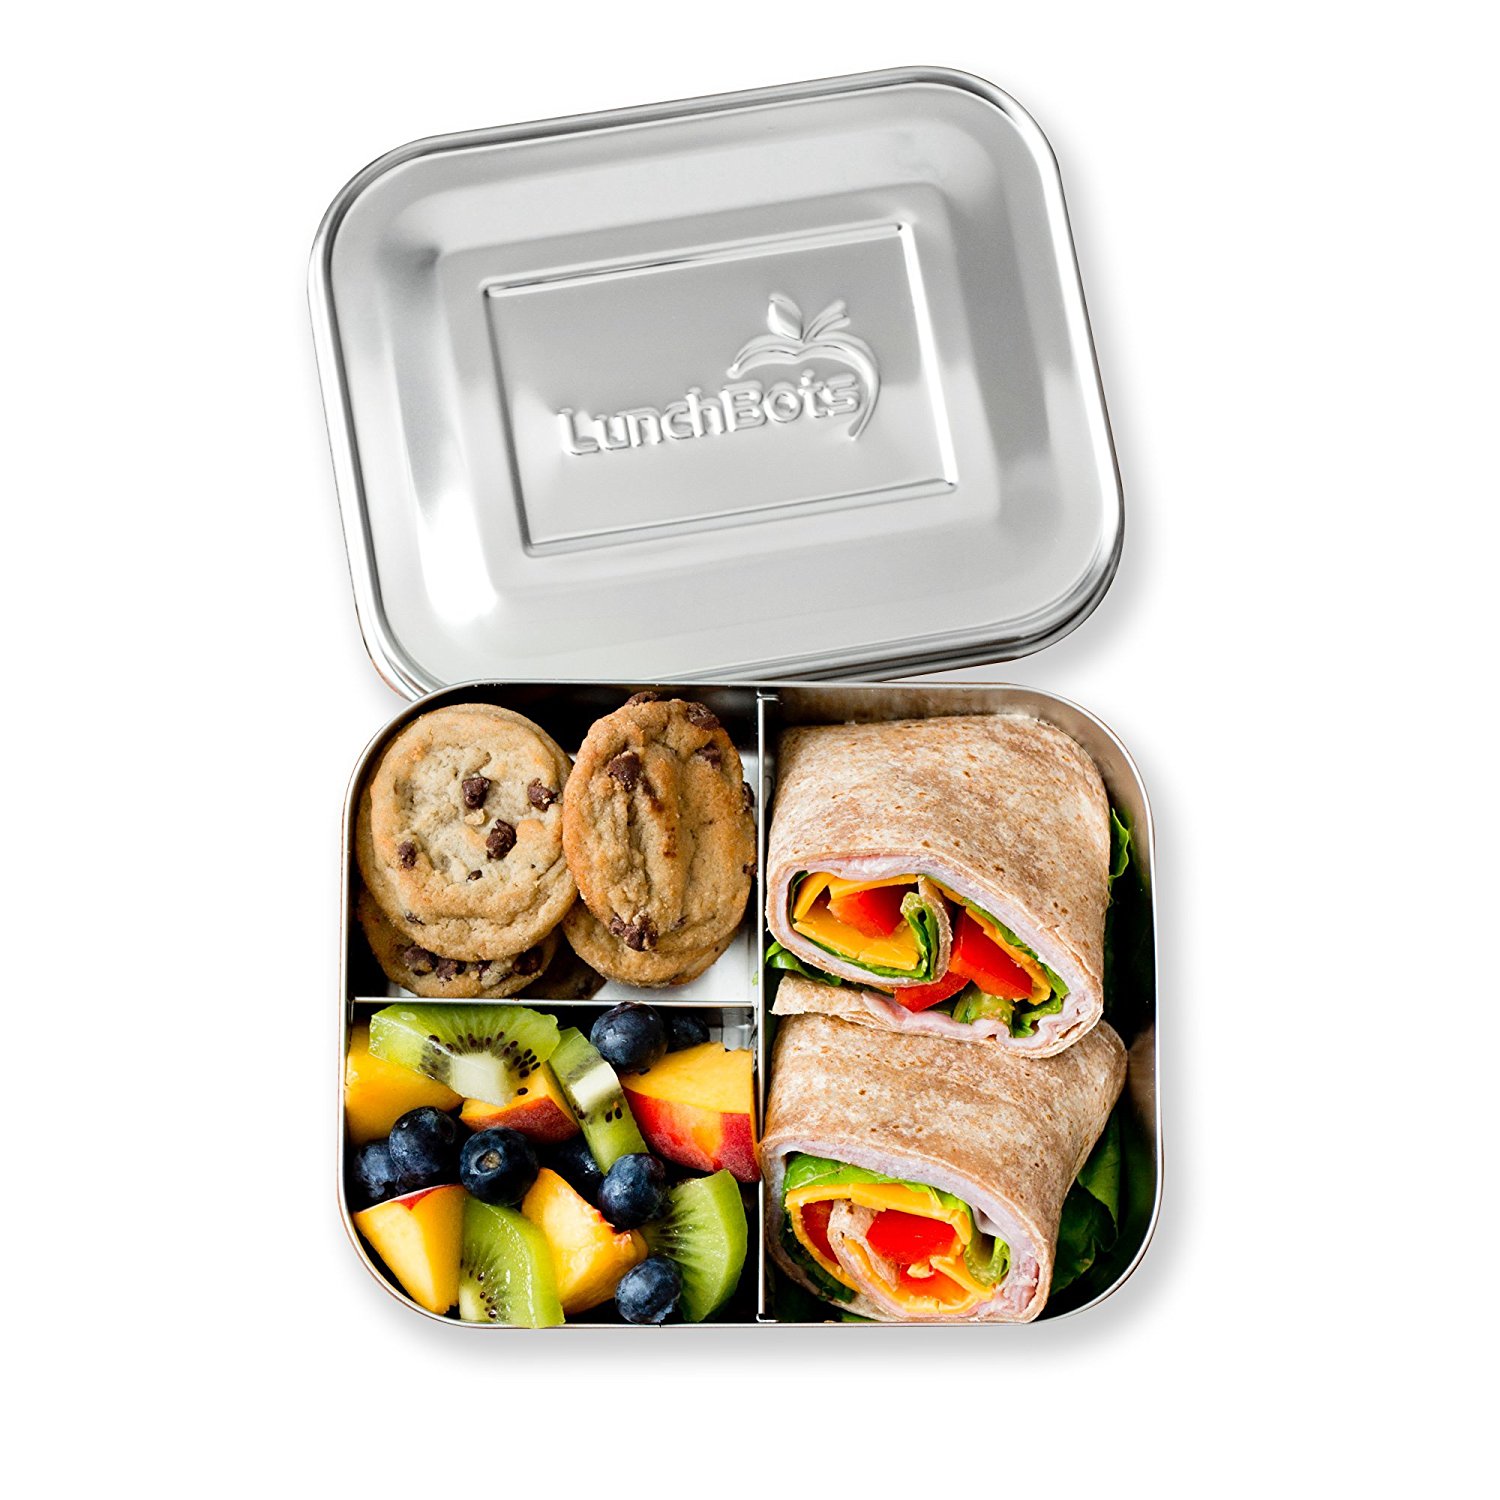 sustainable eco-friendly stainless steel lunch container ukonserve lunchbots trio II